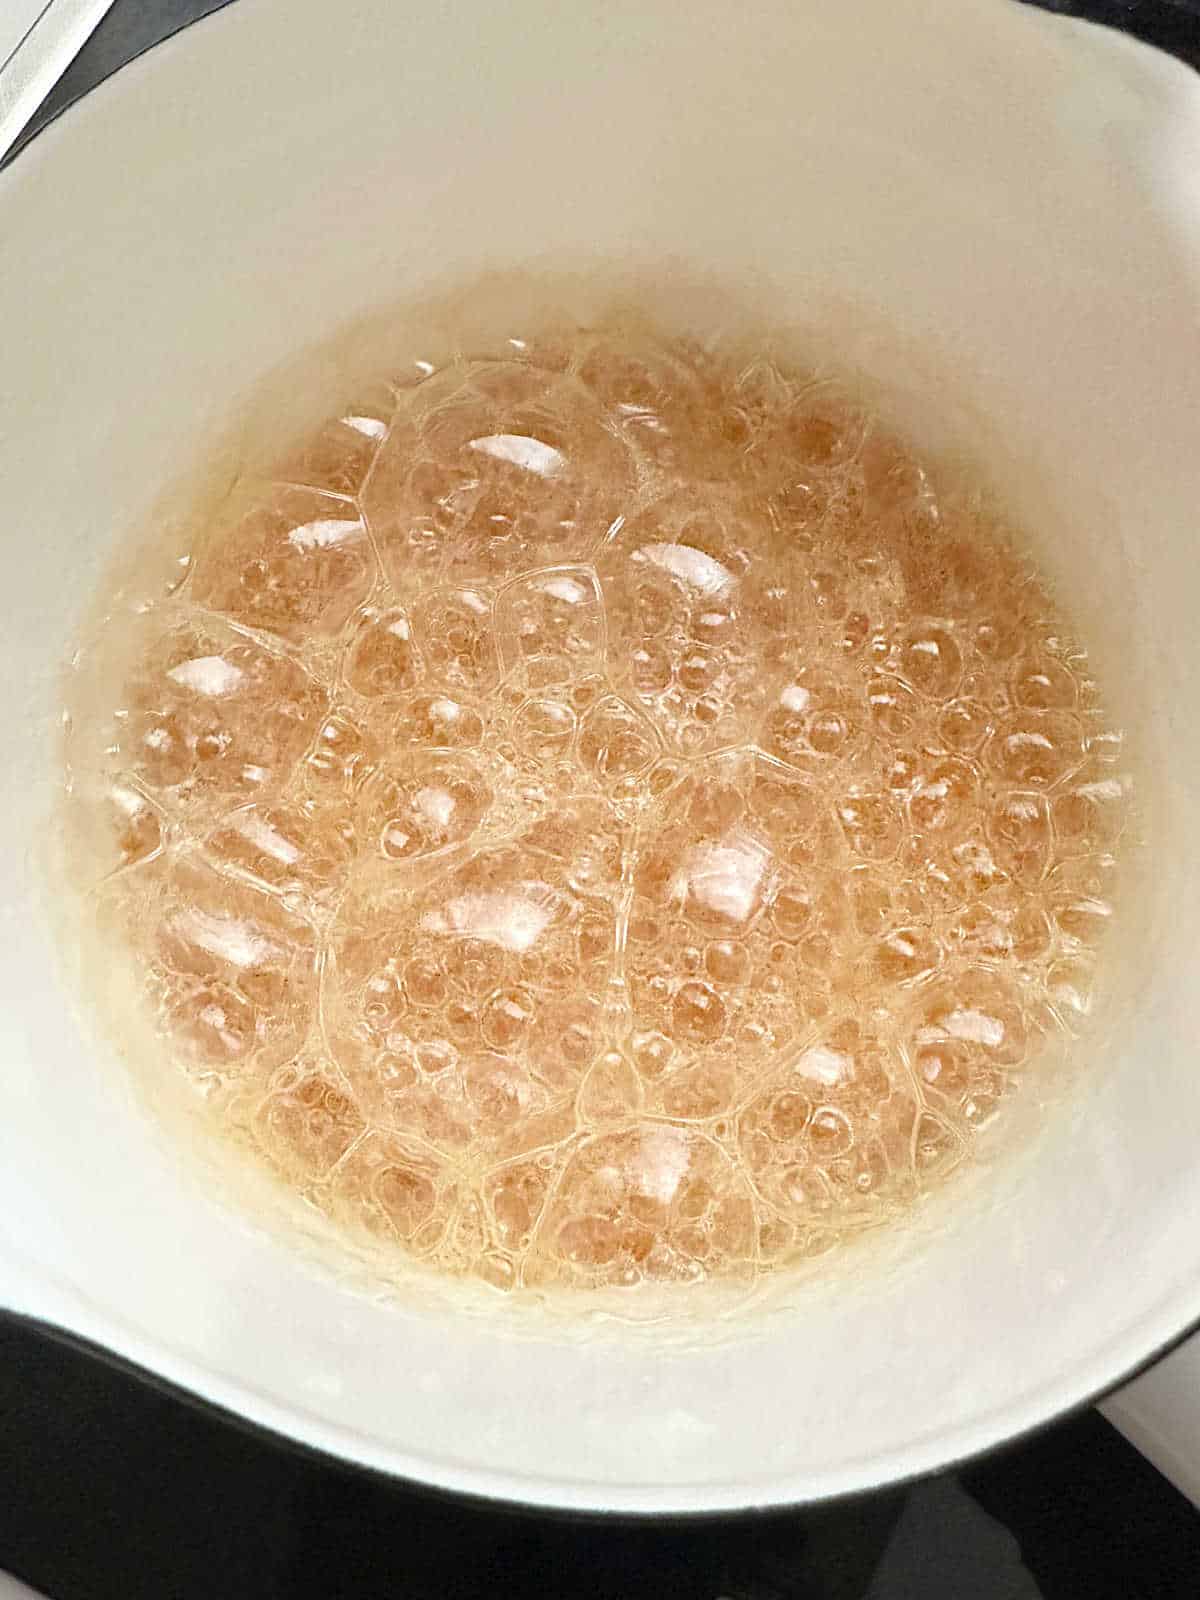 Large light amber color bubbles in a white saucepan.